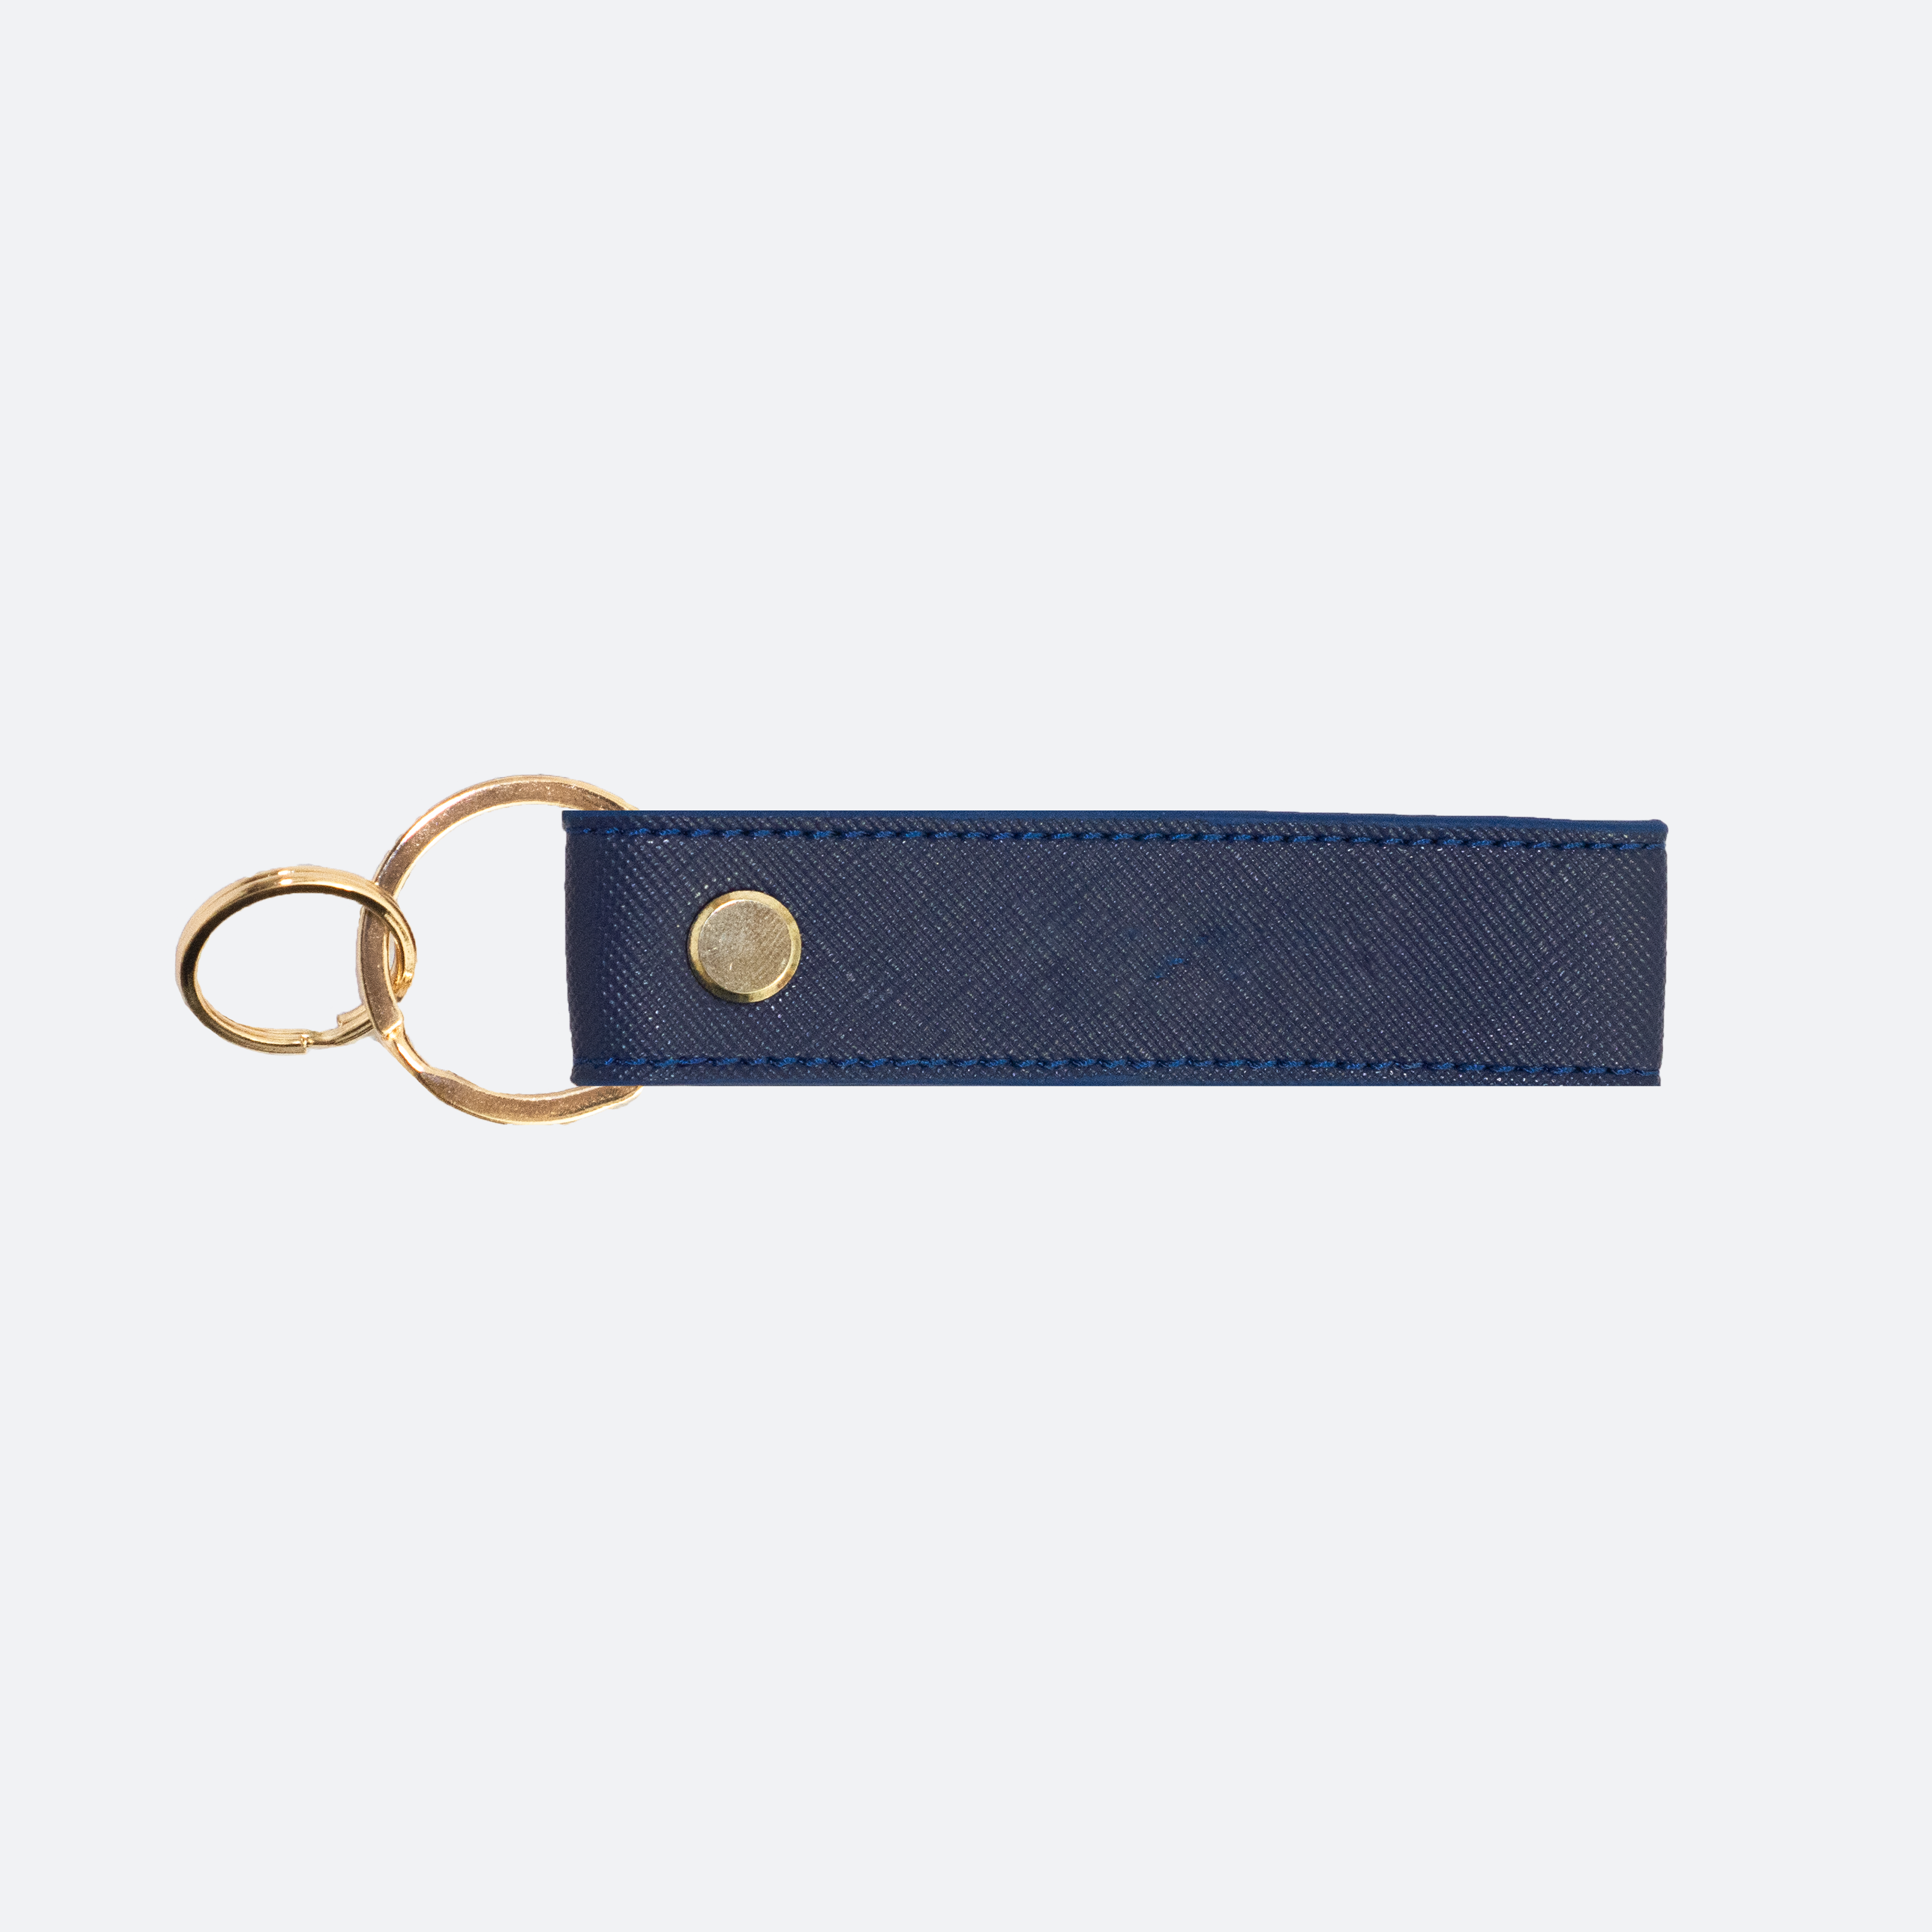 Emerson Saffiano Leather Keychain in Oxford Blue - Kastemize